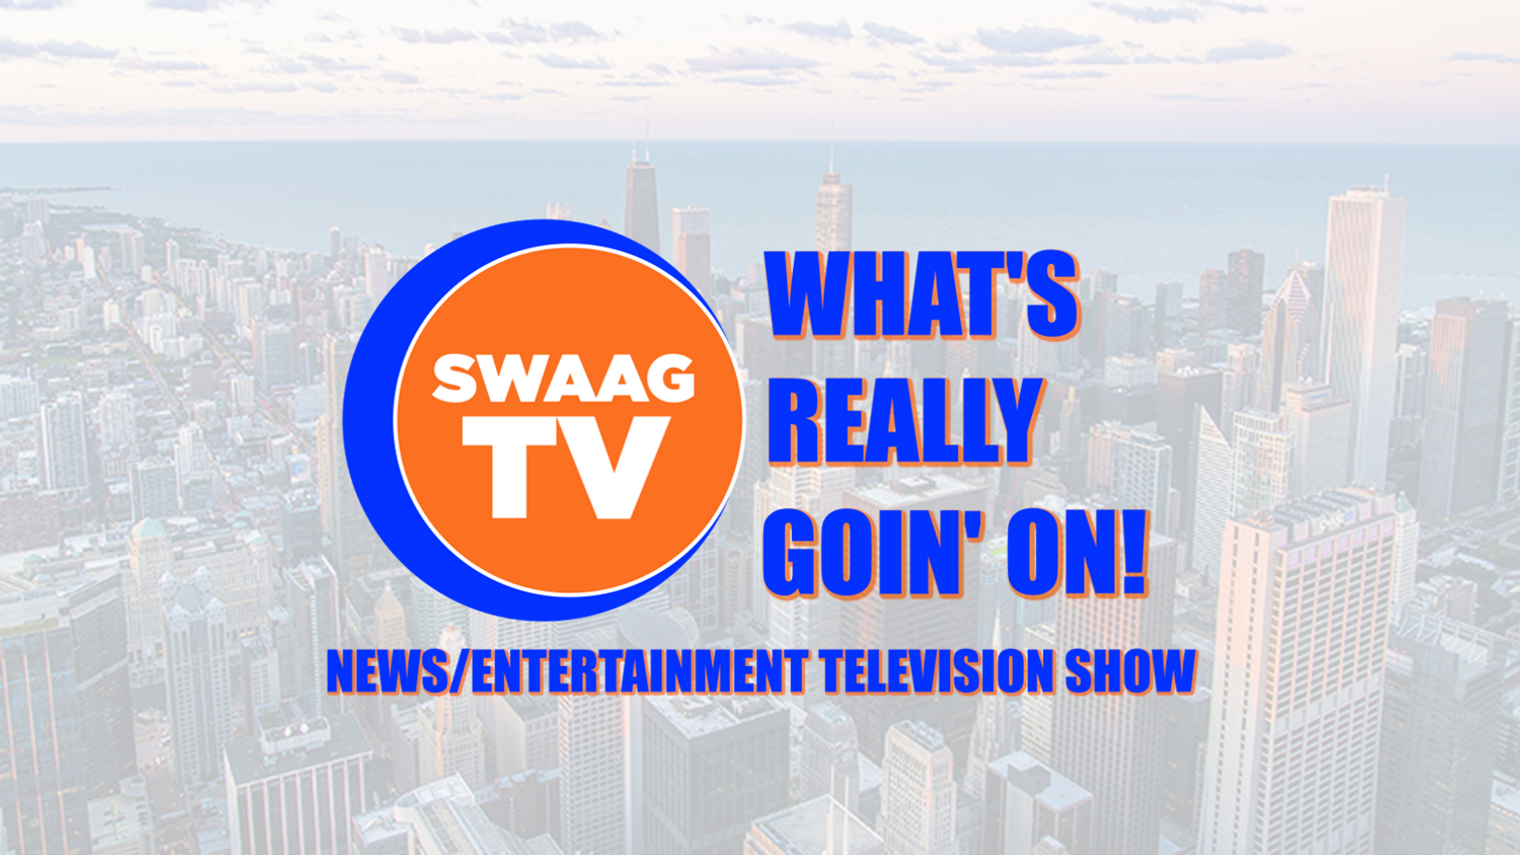 SWAAGTV "WHAT'S REALLY GOIN' ON!" NEWS/ENTERTAINMENT SHOW